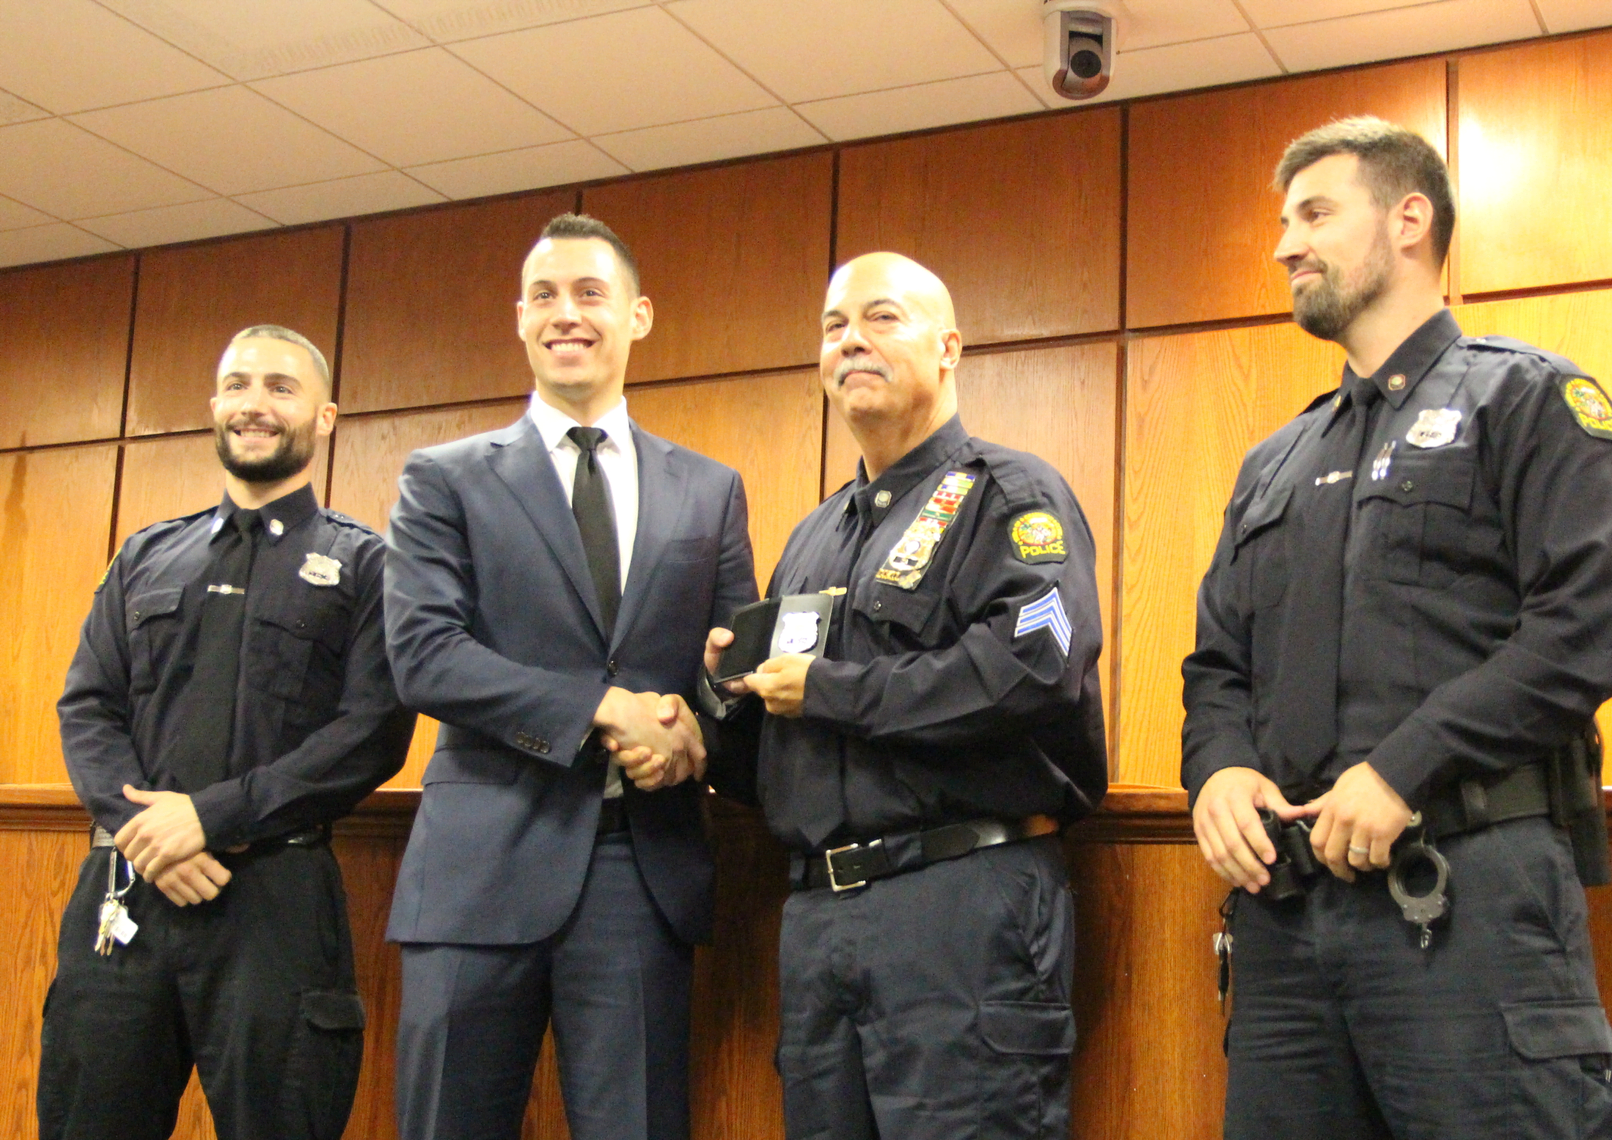 Newly sworn in Greenwich Police officer William O'Connor with his father Sergeant Michael O'Connor Sr flanked by brothers Patrick and Michael Jr., also both Greenwich Police officers. Oct 1, 2018 Photo: Leslie Yager